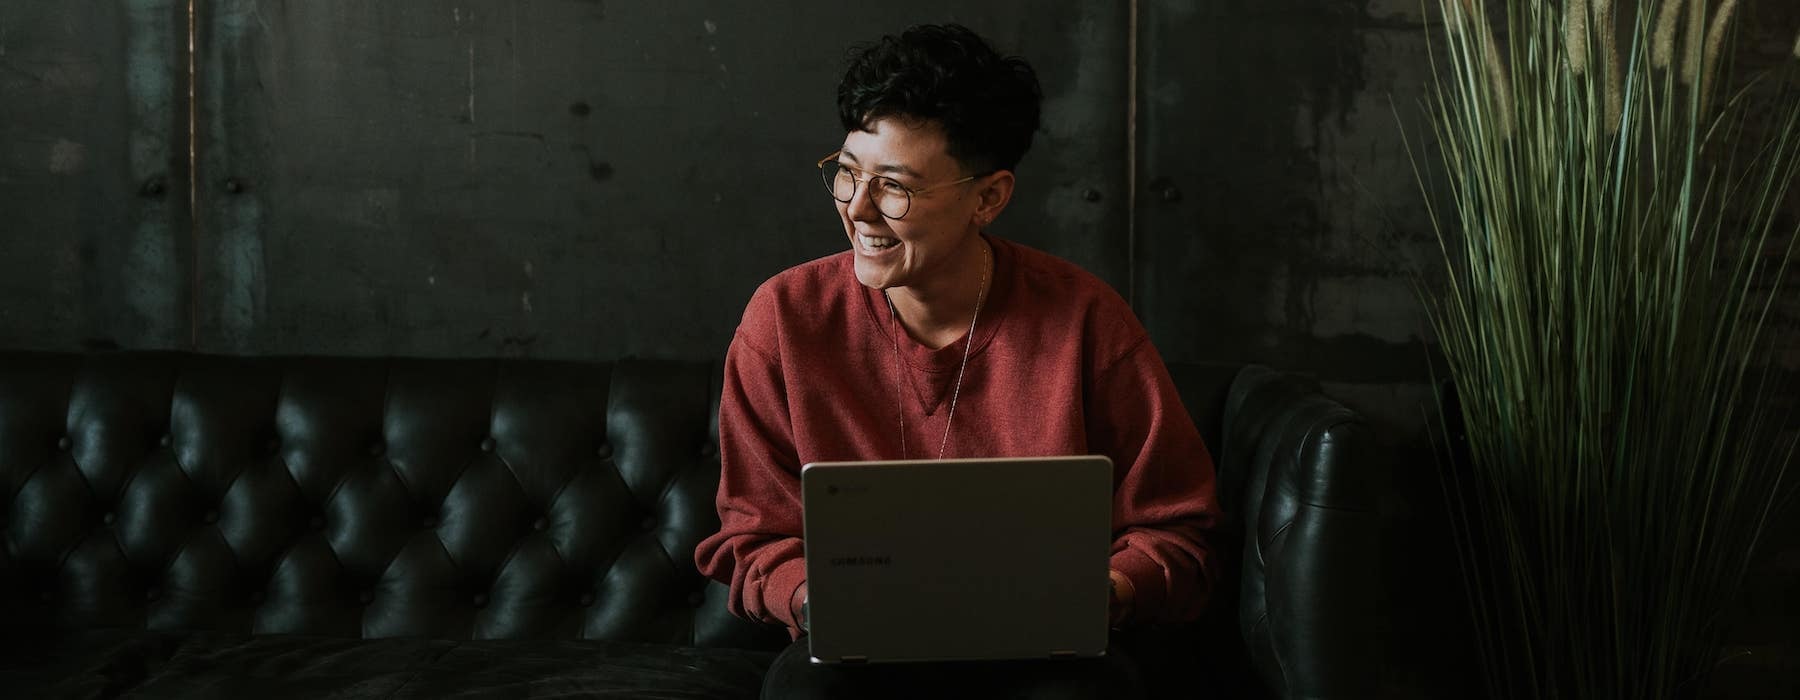 a woman smiling in a warm-toned room with a laptop on her lap